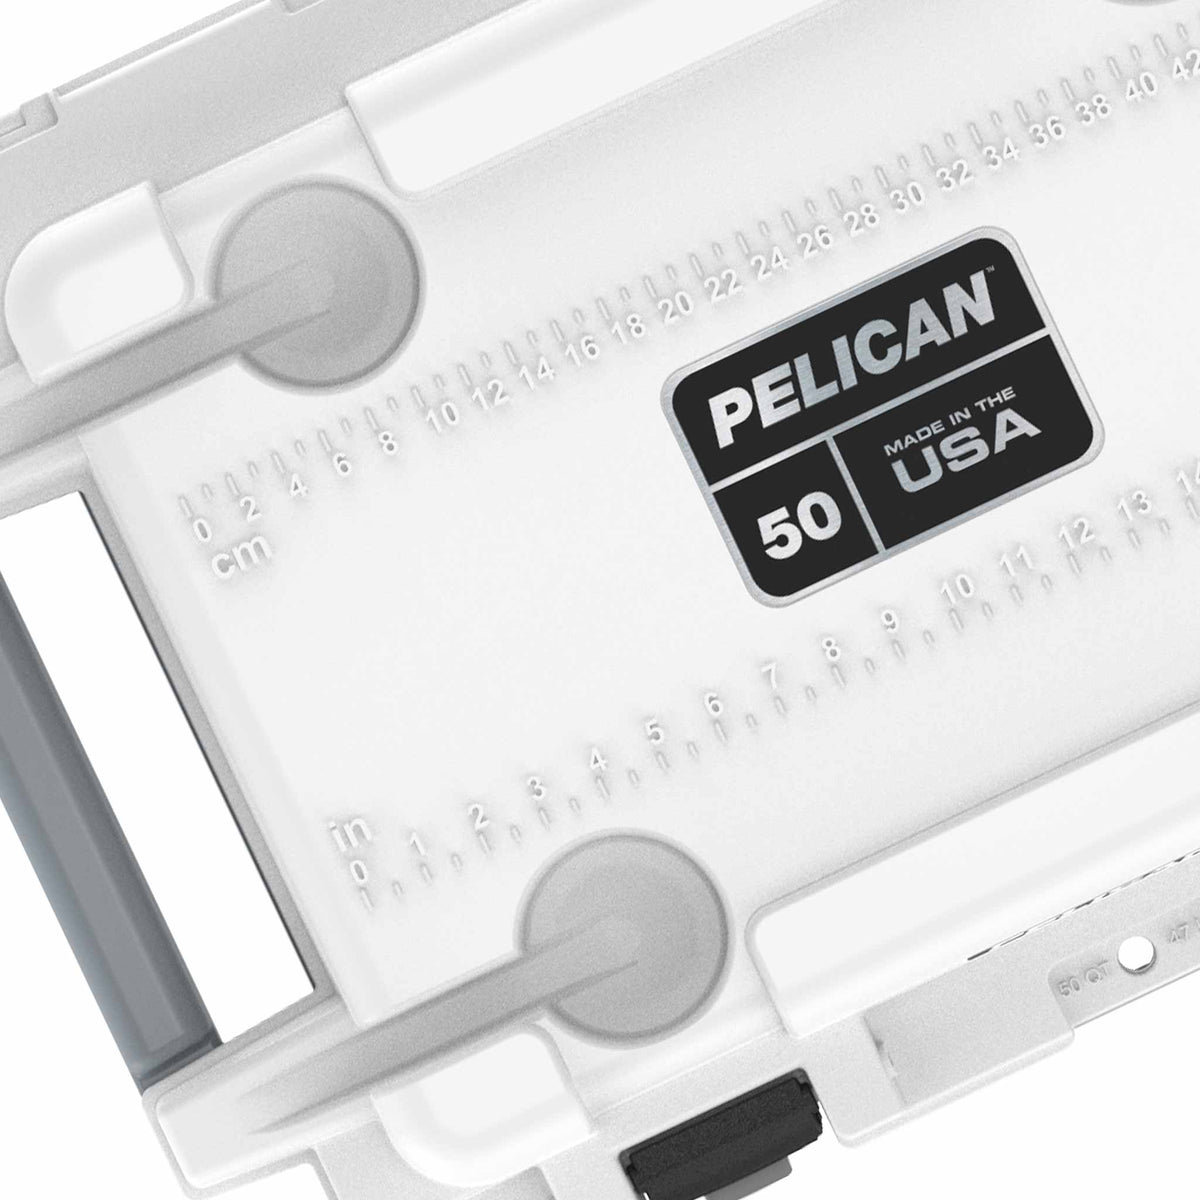 50QT Pelican Elite Cooler has integrated cup holders and a ruler in the lid